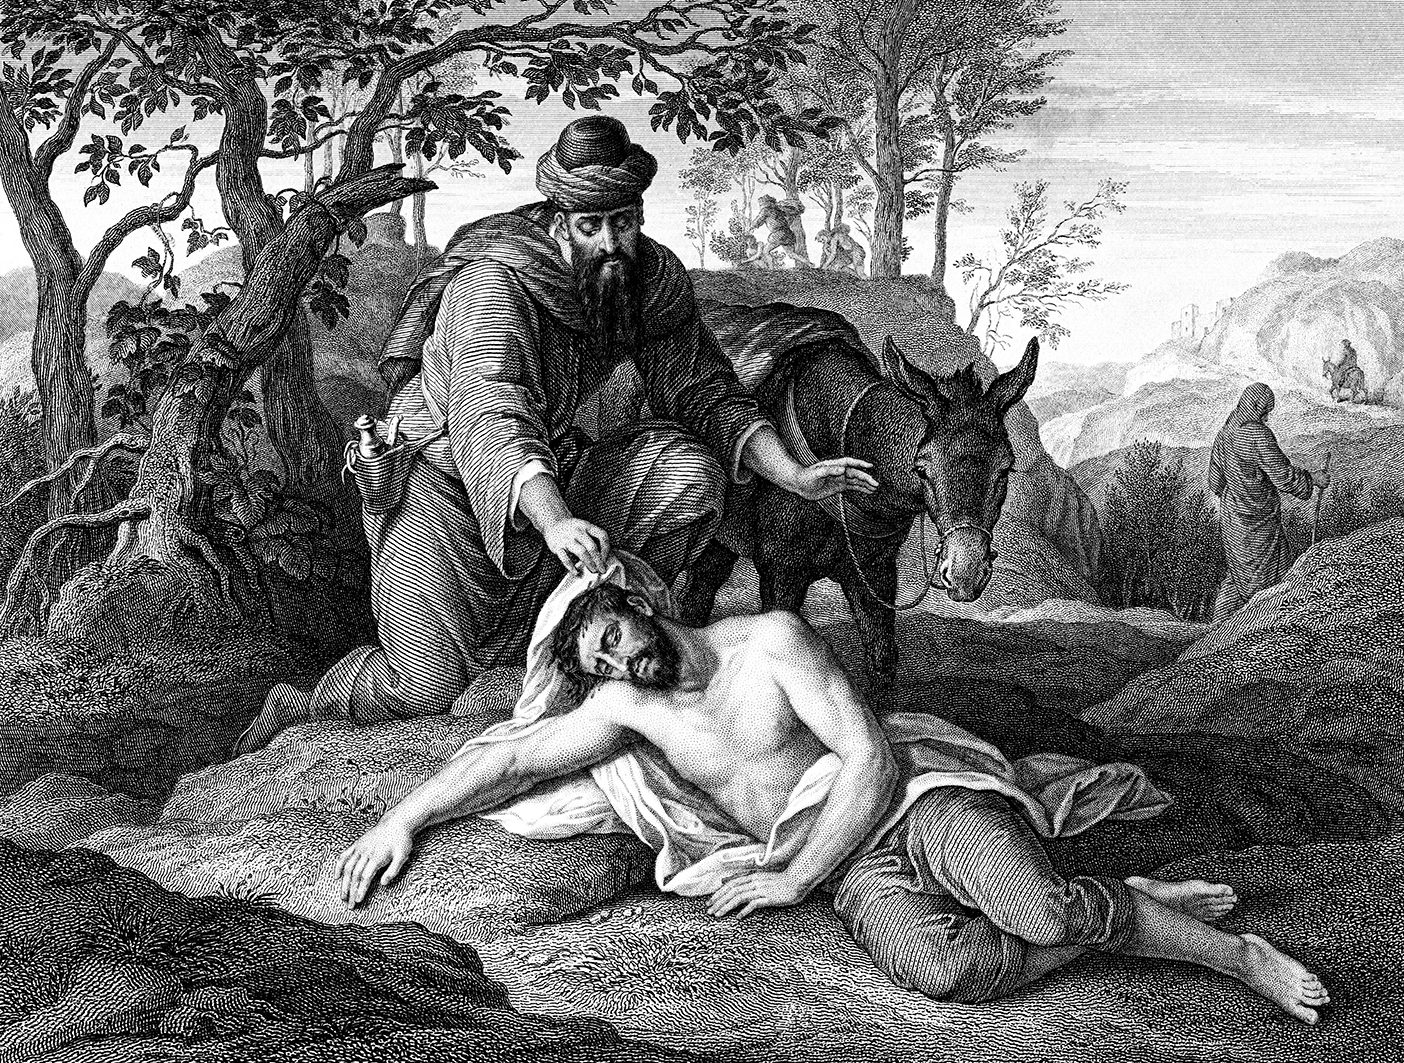 An engraved vintage illustration image of the parable of the Good Samaritan, from a Victorian book dated 1879